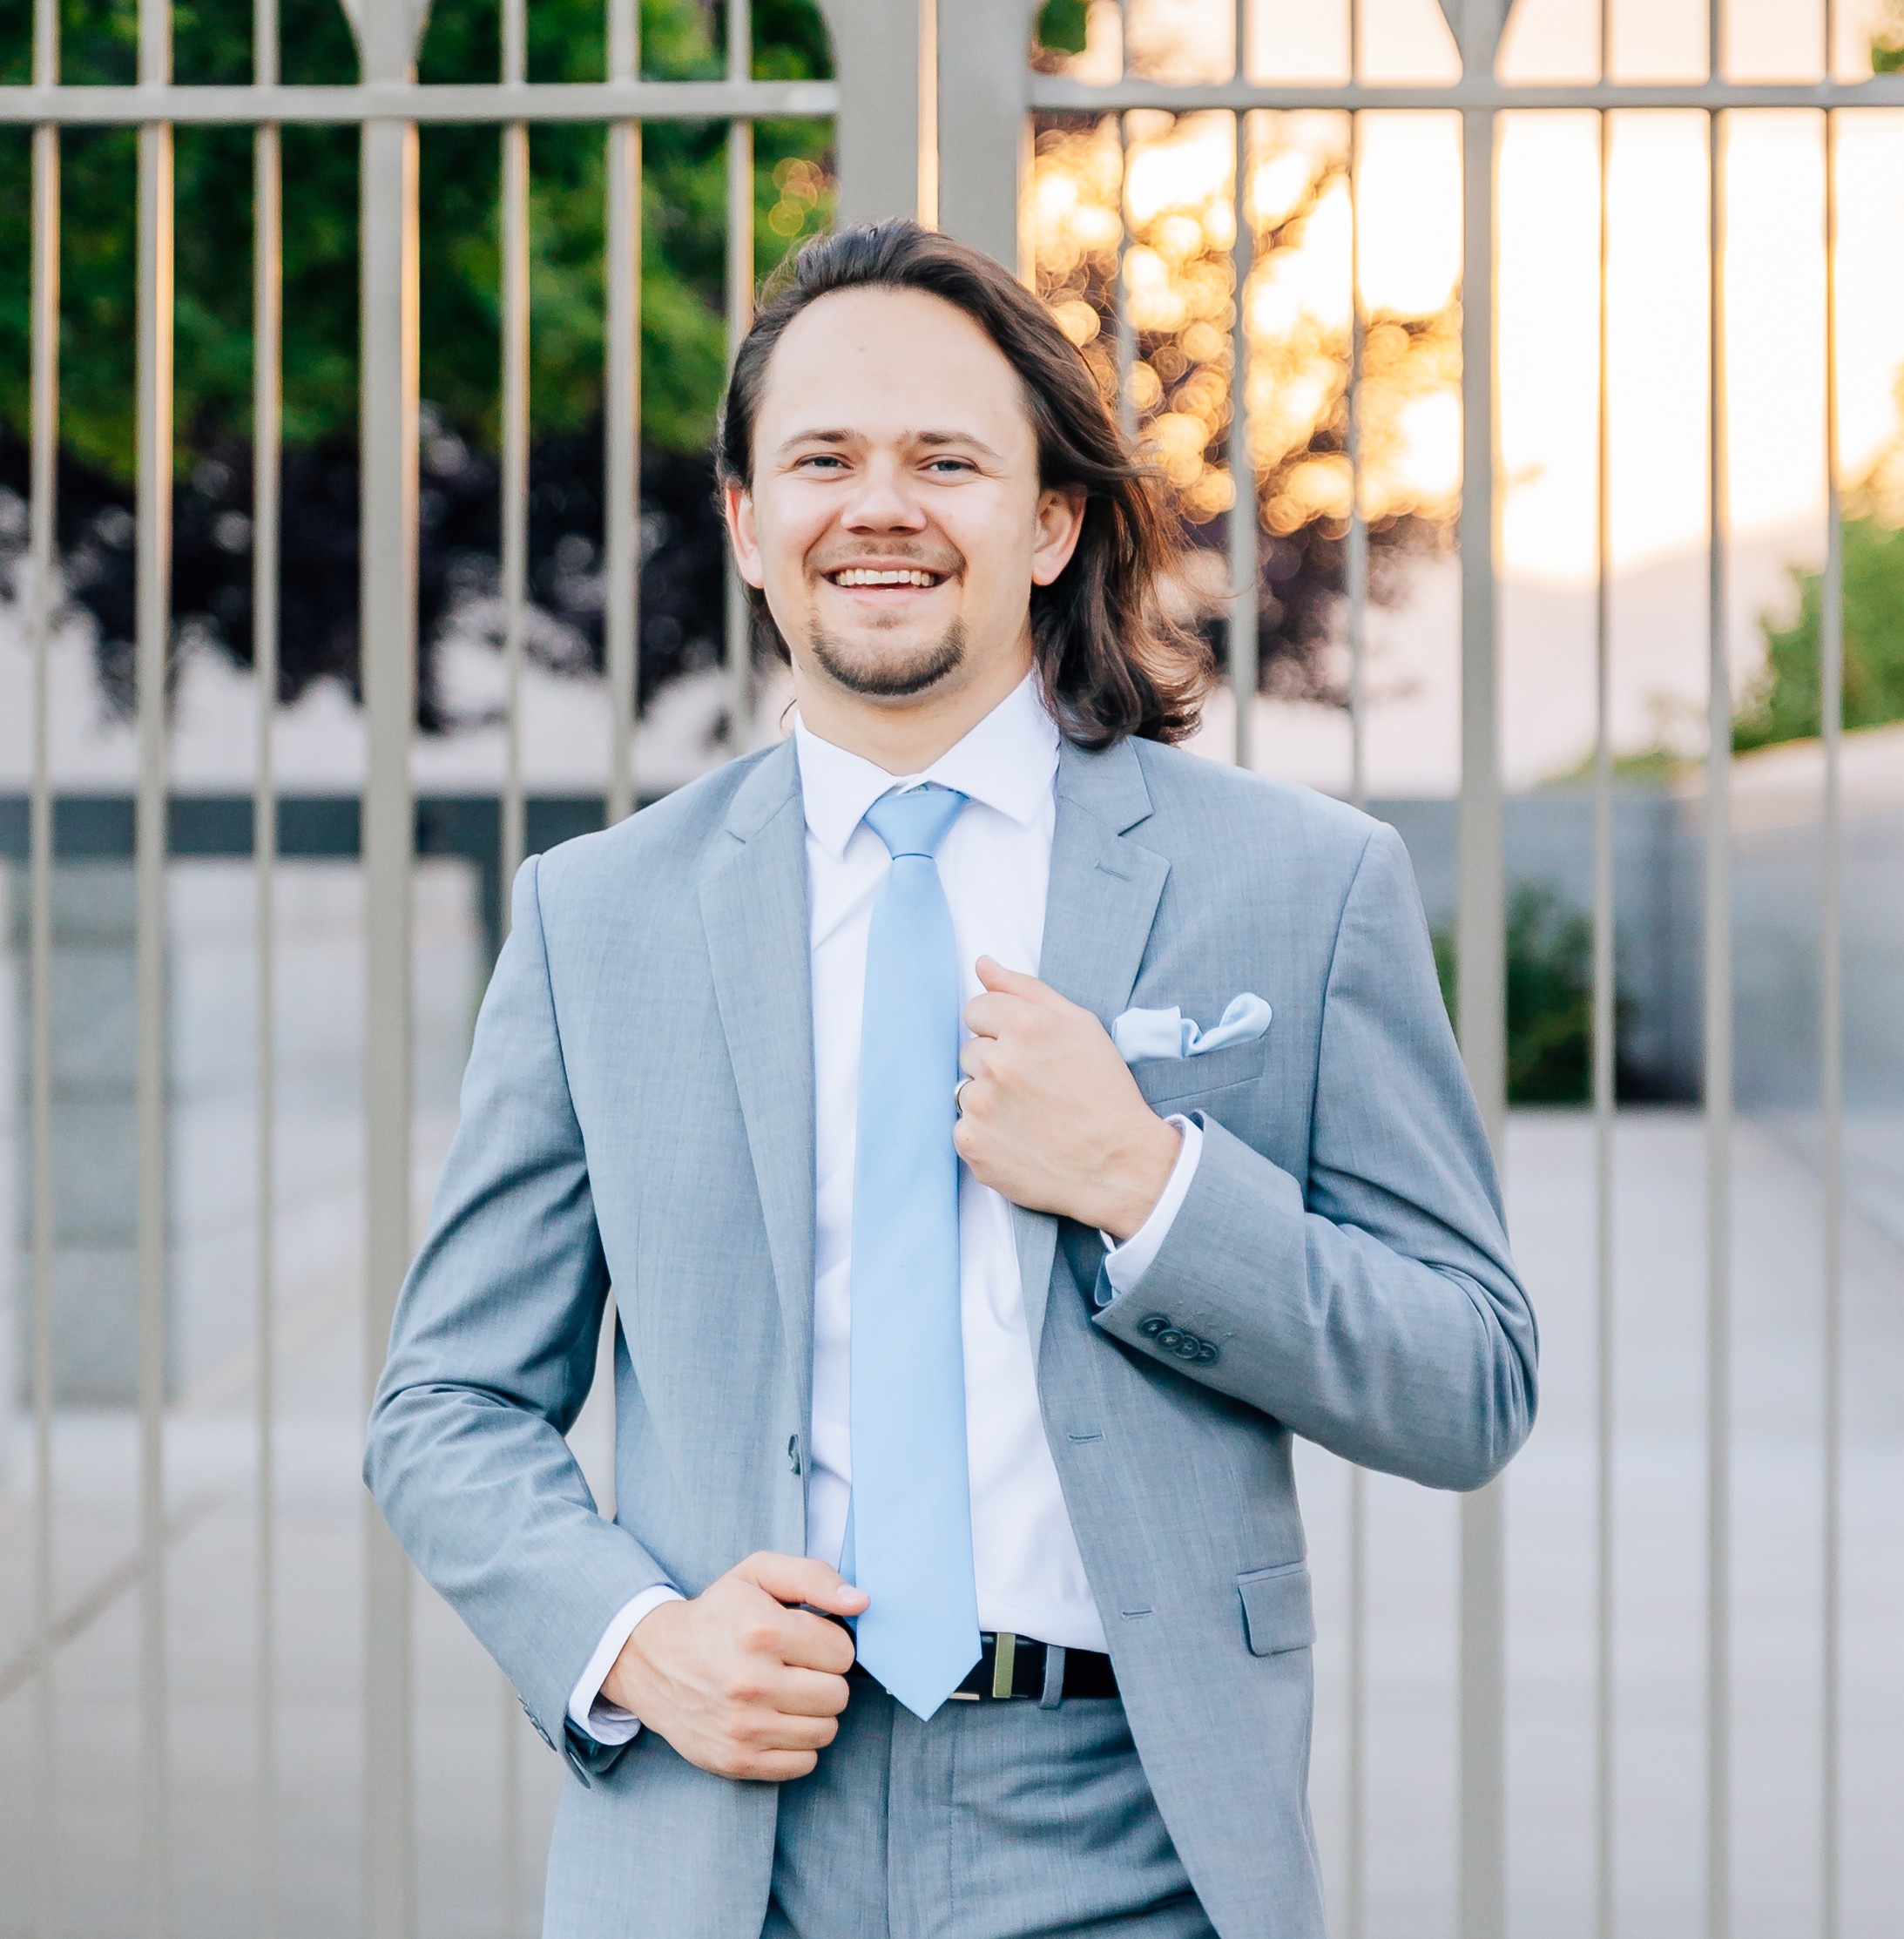 A dashing young man with long hair blowing in the wind posing in front of a gate wearing a grey suit with a white shirt and dusty blue tie